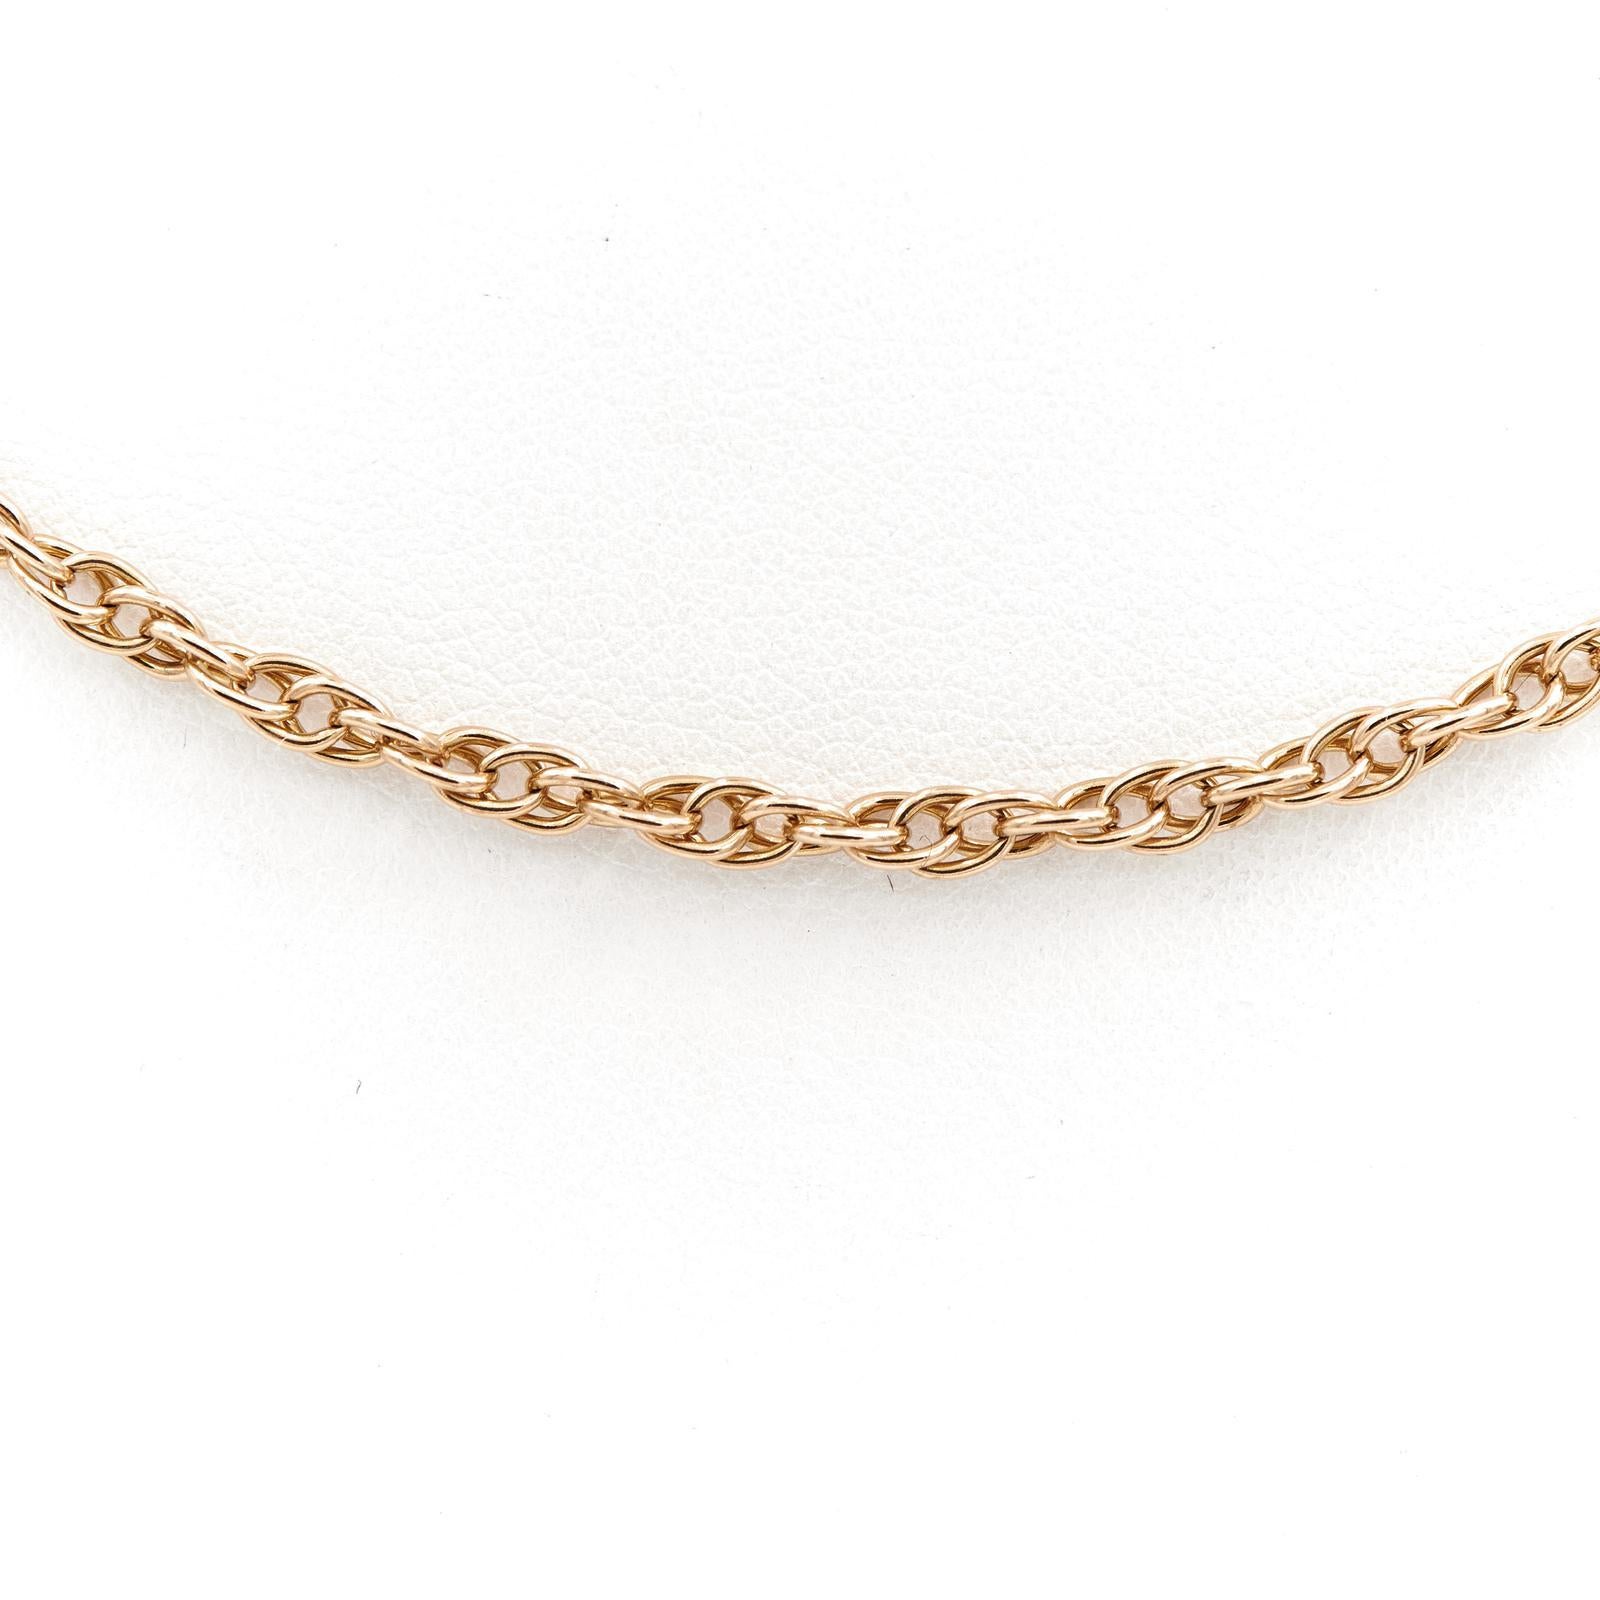 Chain necklace. in yellow gold 750 thousandths (18 carats). singapore mesh. length: 57.5 cm. width: 0.26 cm. total weight: 14.03 g. eagle head hallmark. excellent condition.
